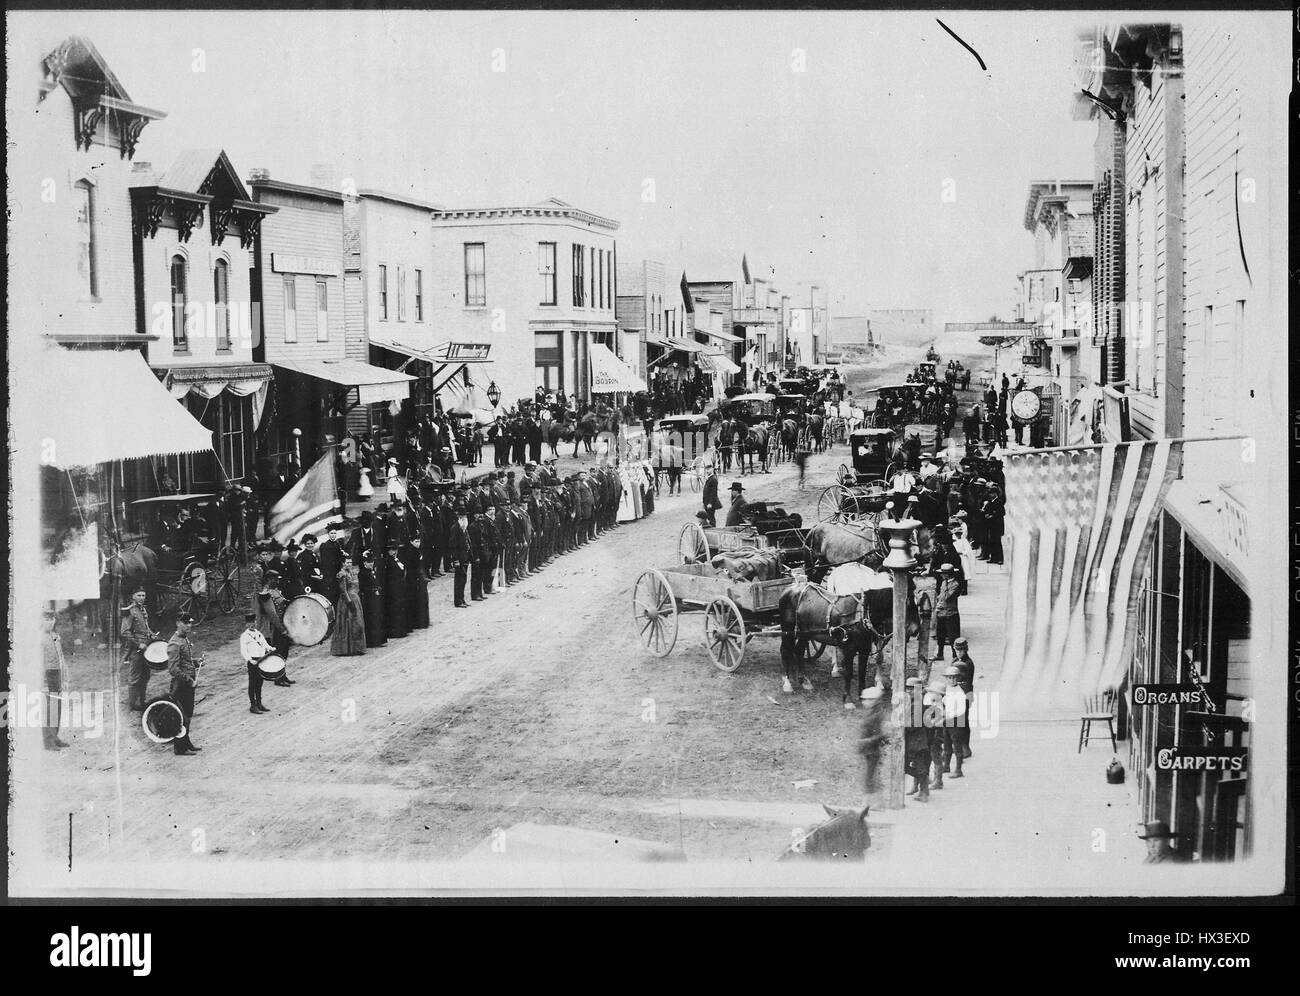 Civil War veterans during Fourth of July or Decoration Day on review in the center of town, Ortonville, Minnesota, 1880. Image courtesy National Archives. Stock Photo